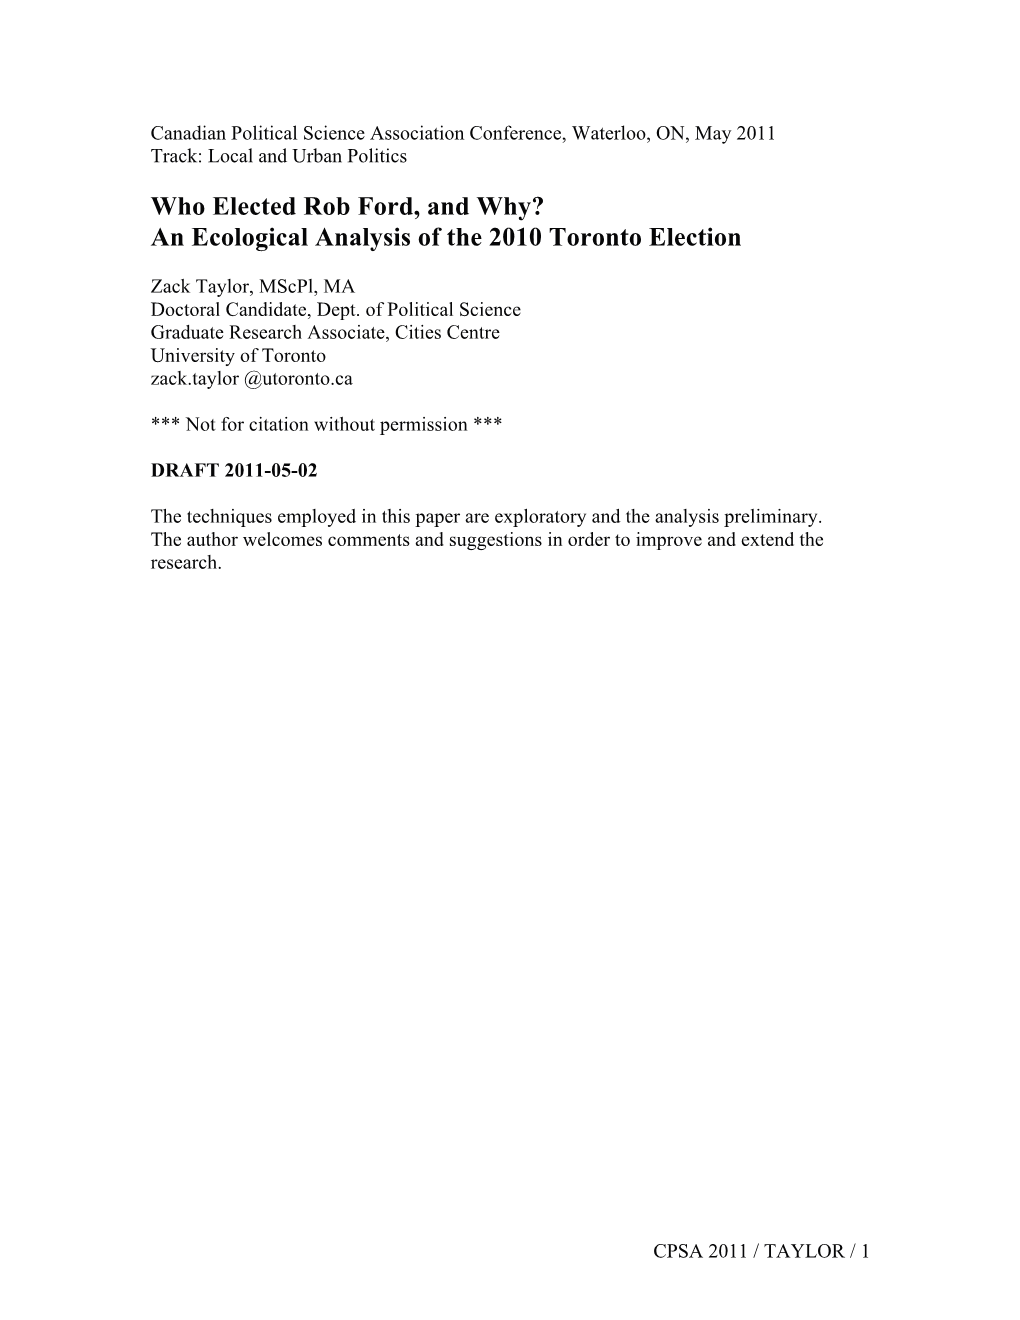 Who Elected Rob Ford, and Why? an Ecological Analysis of the 2010 Toronto Election